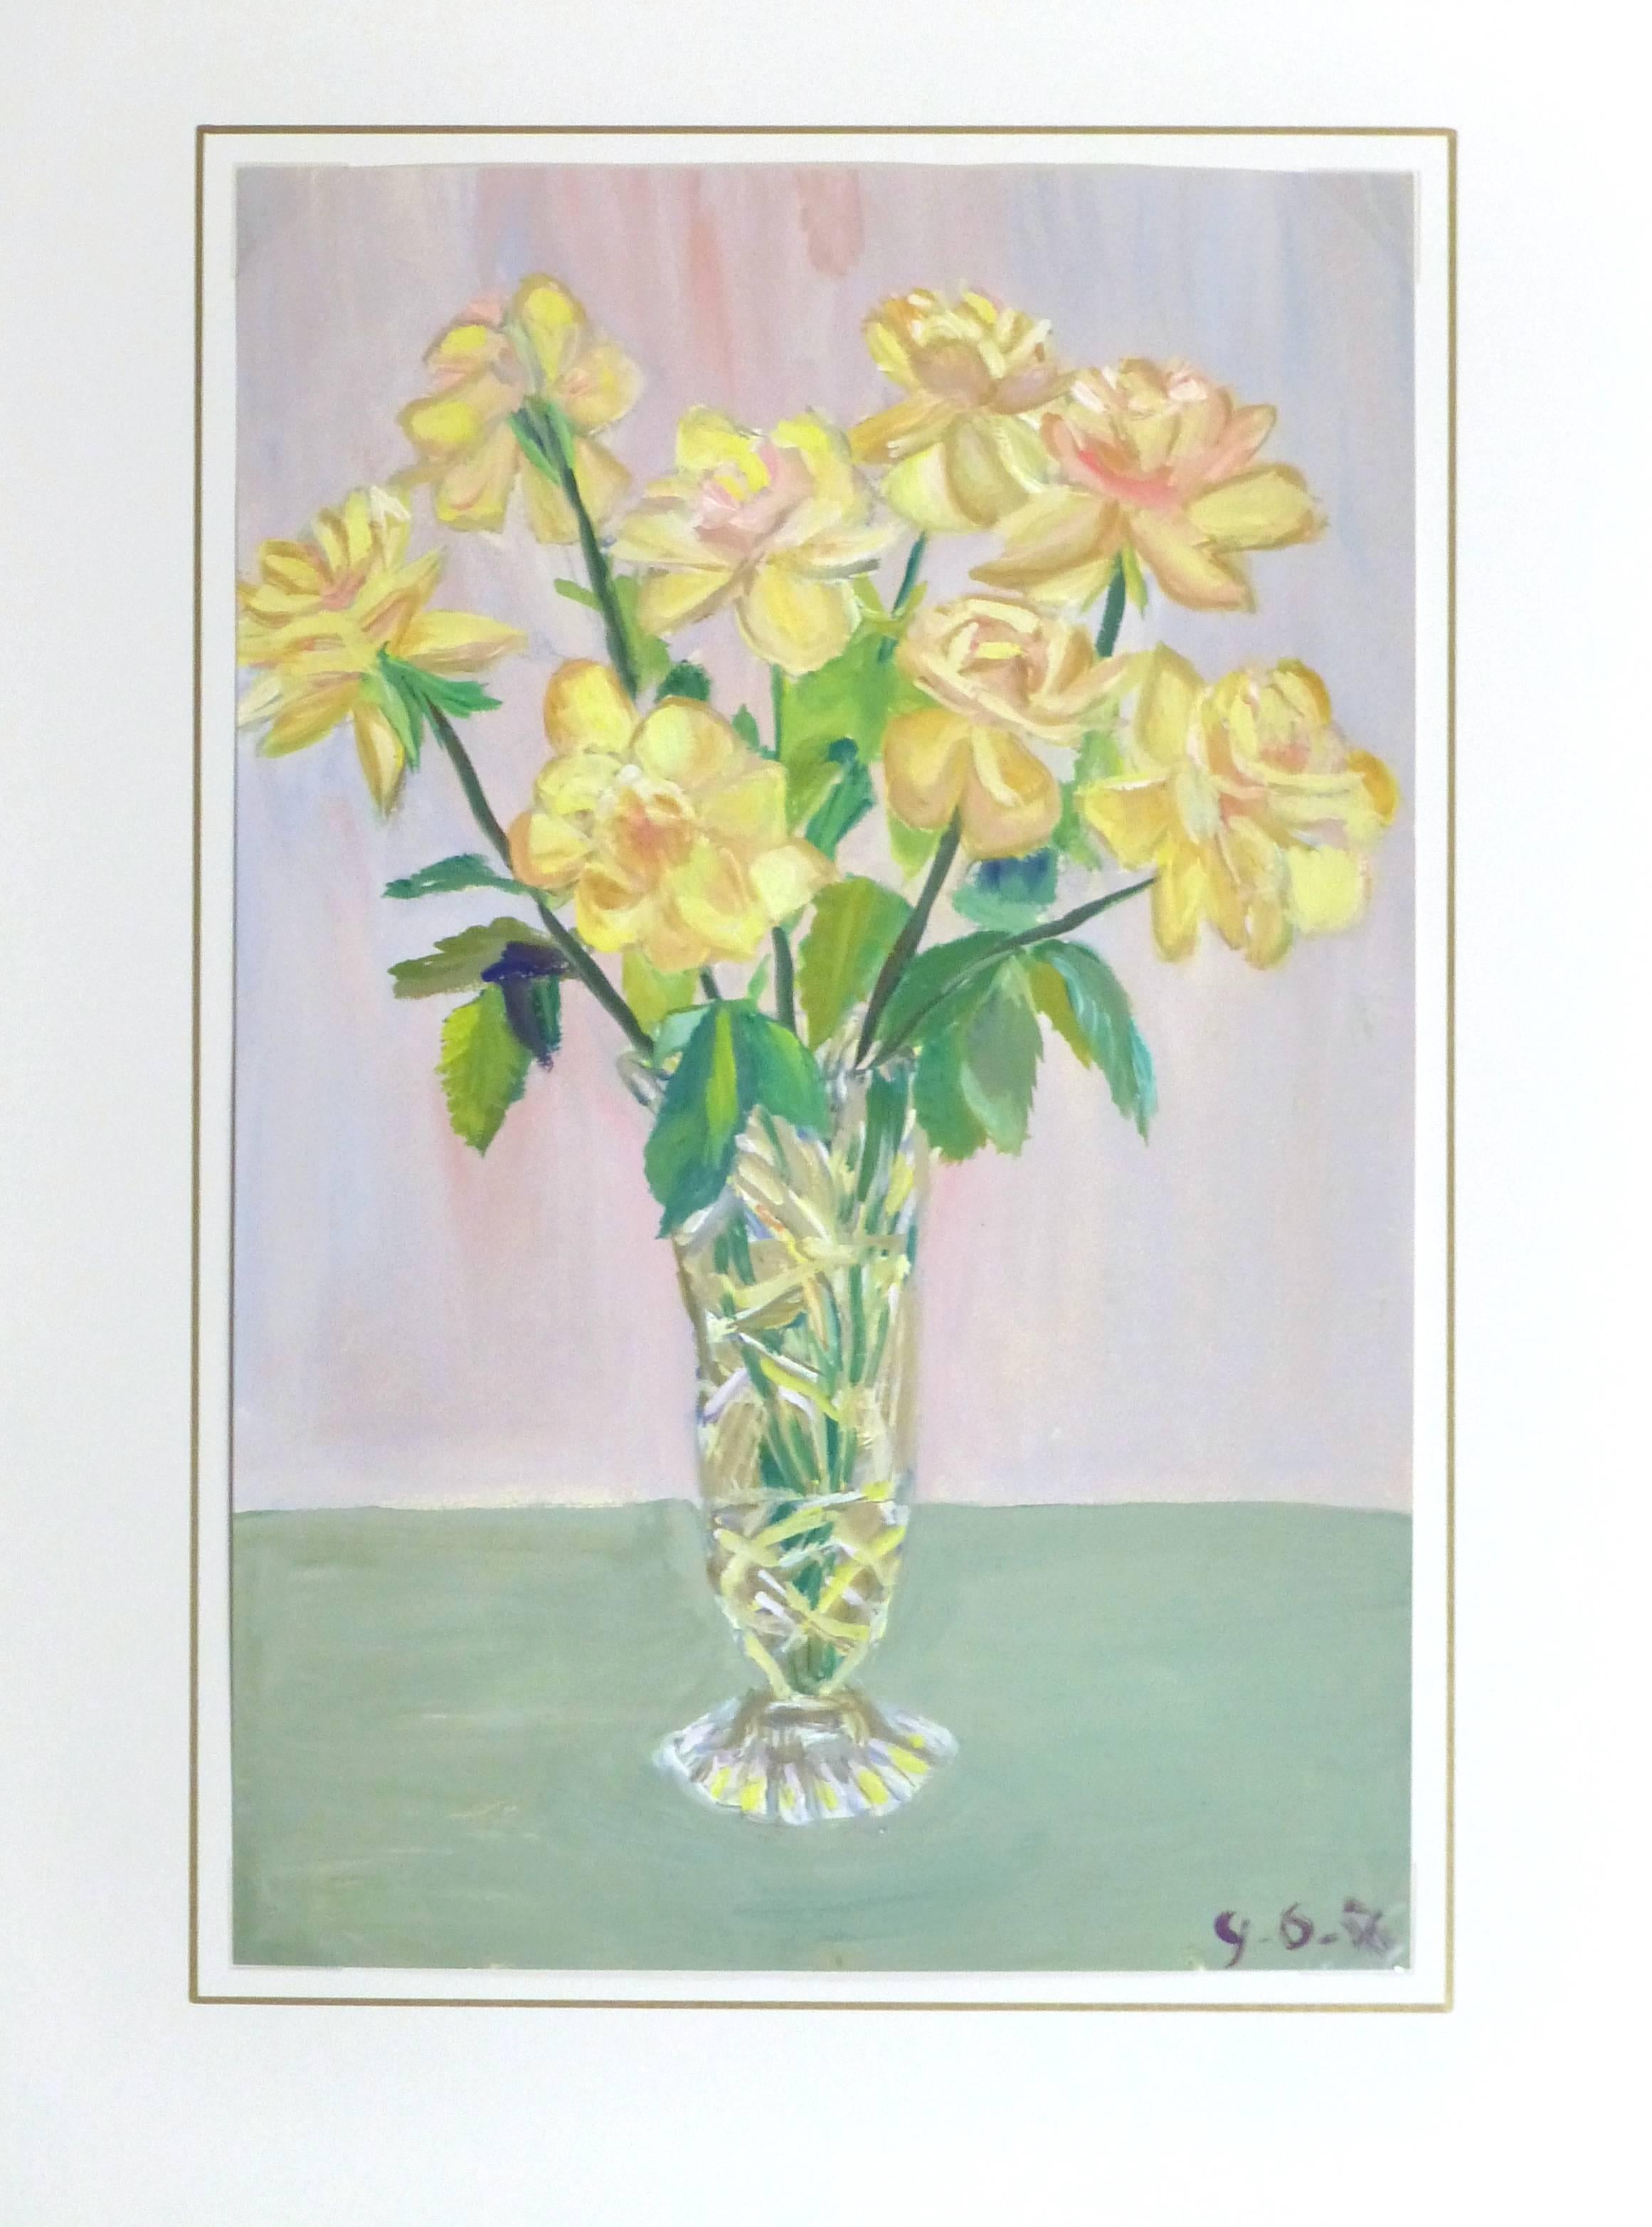 French painting depicting a softly-colored bouquet of yellow roses by artist Louisette Poirier, 1956. Dated lower right.

Original artwork on paper displayed on a white mat with a gold border. Mat fits a standard-size frame.  Archival plastic sleeve